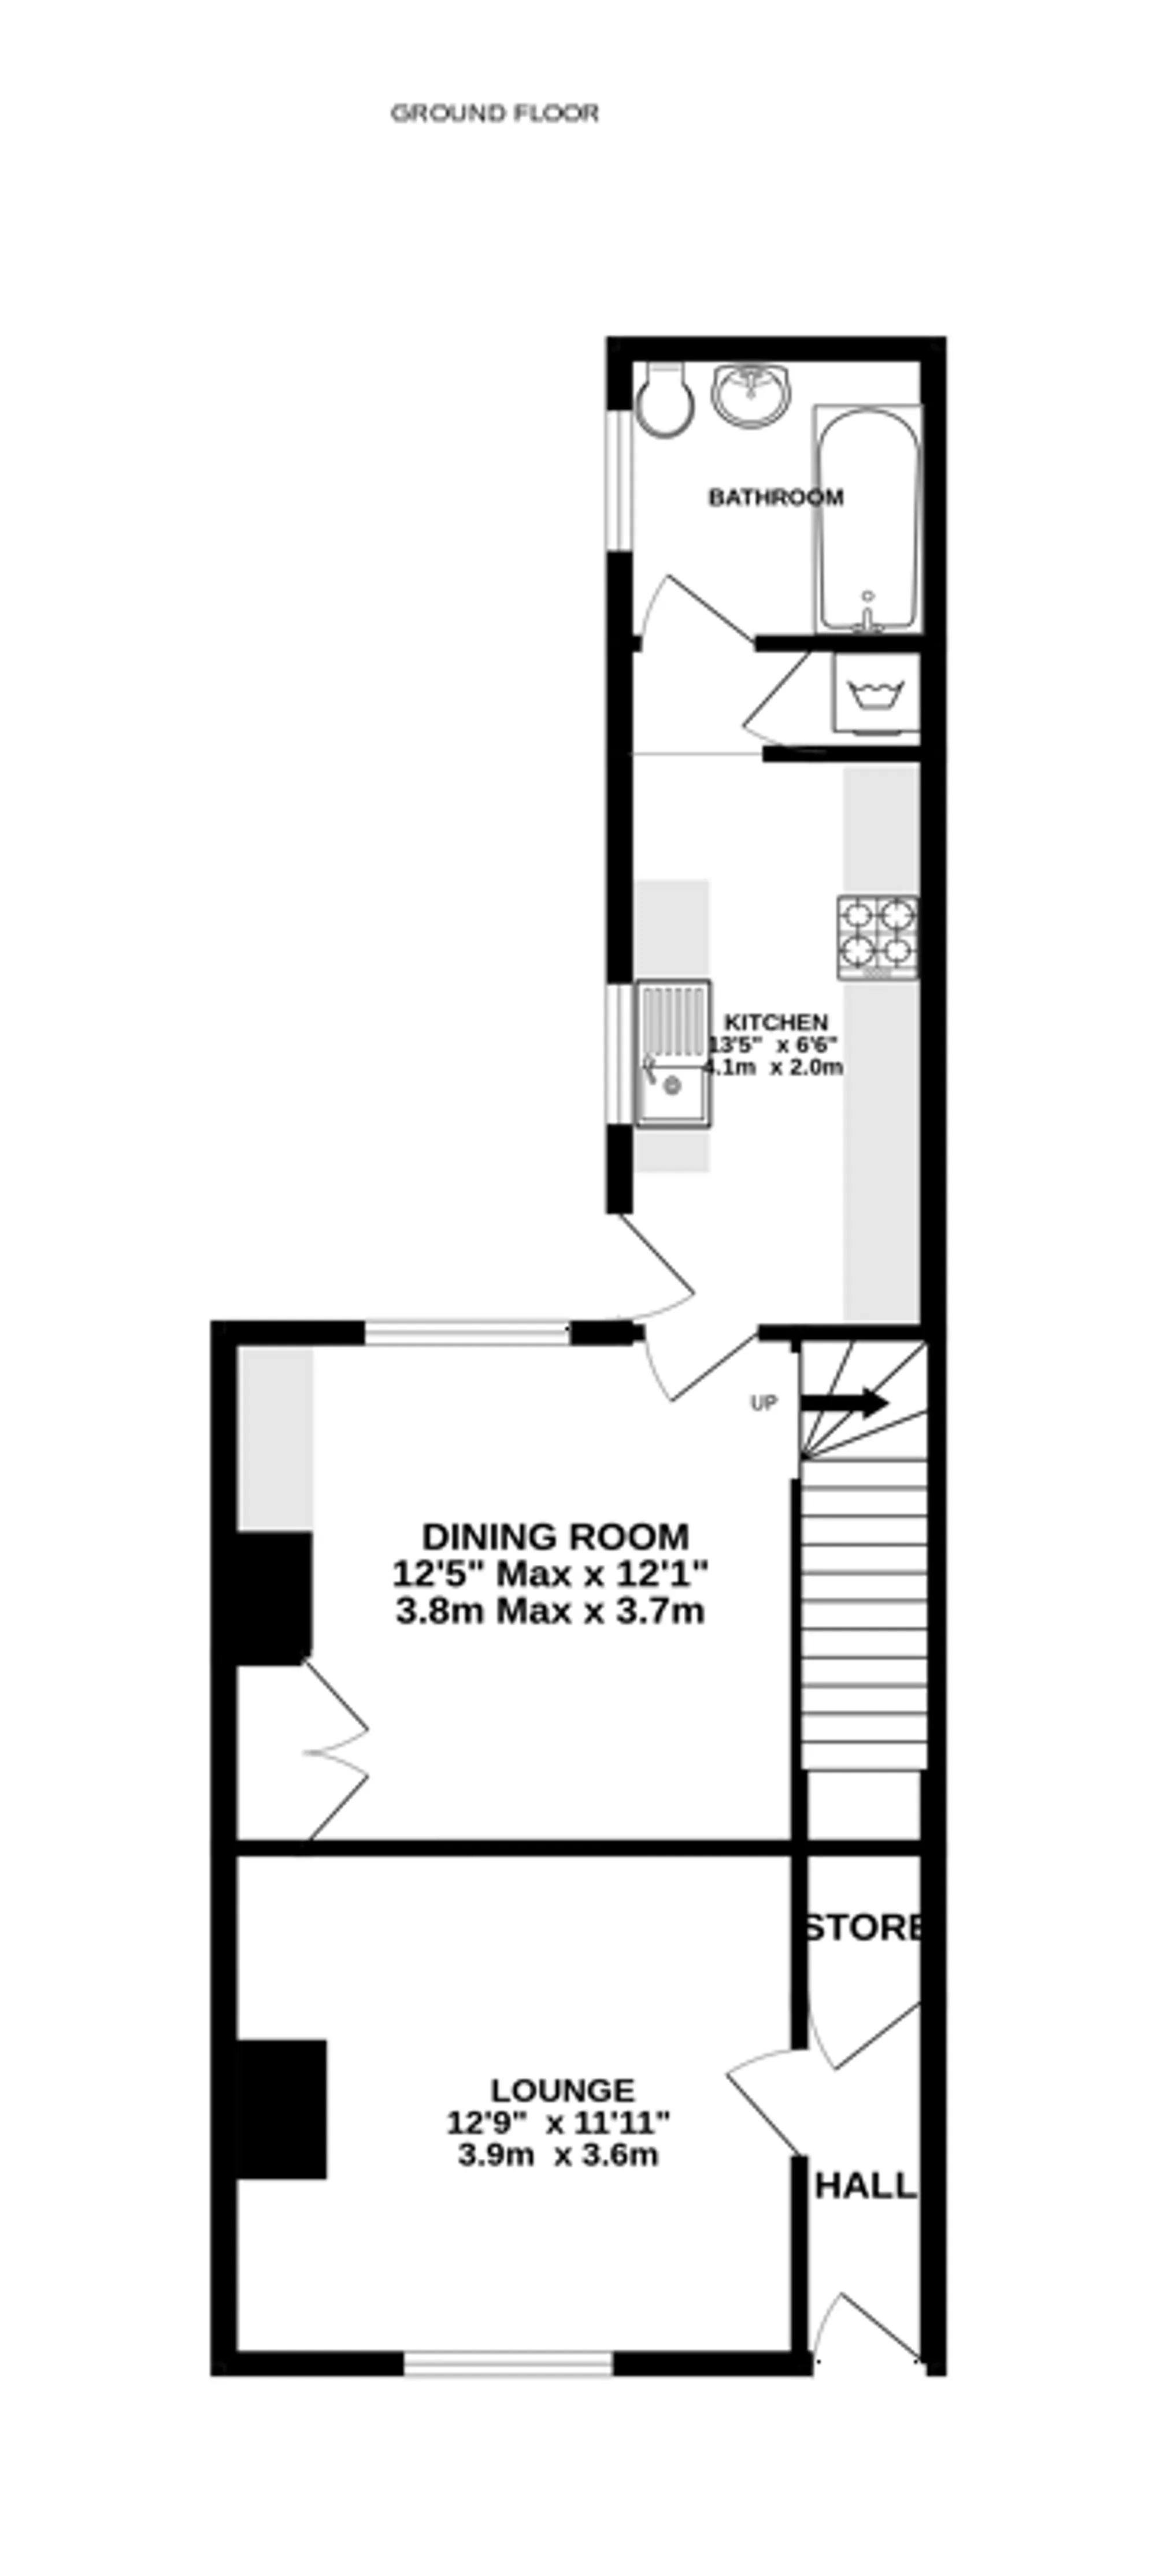 3 bed terraced house for sale in Leicester Road, Loughborough - Property floorplan